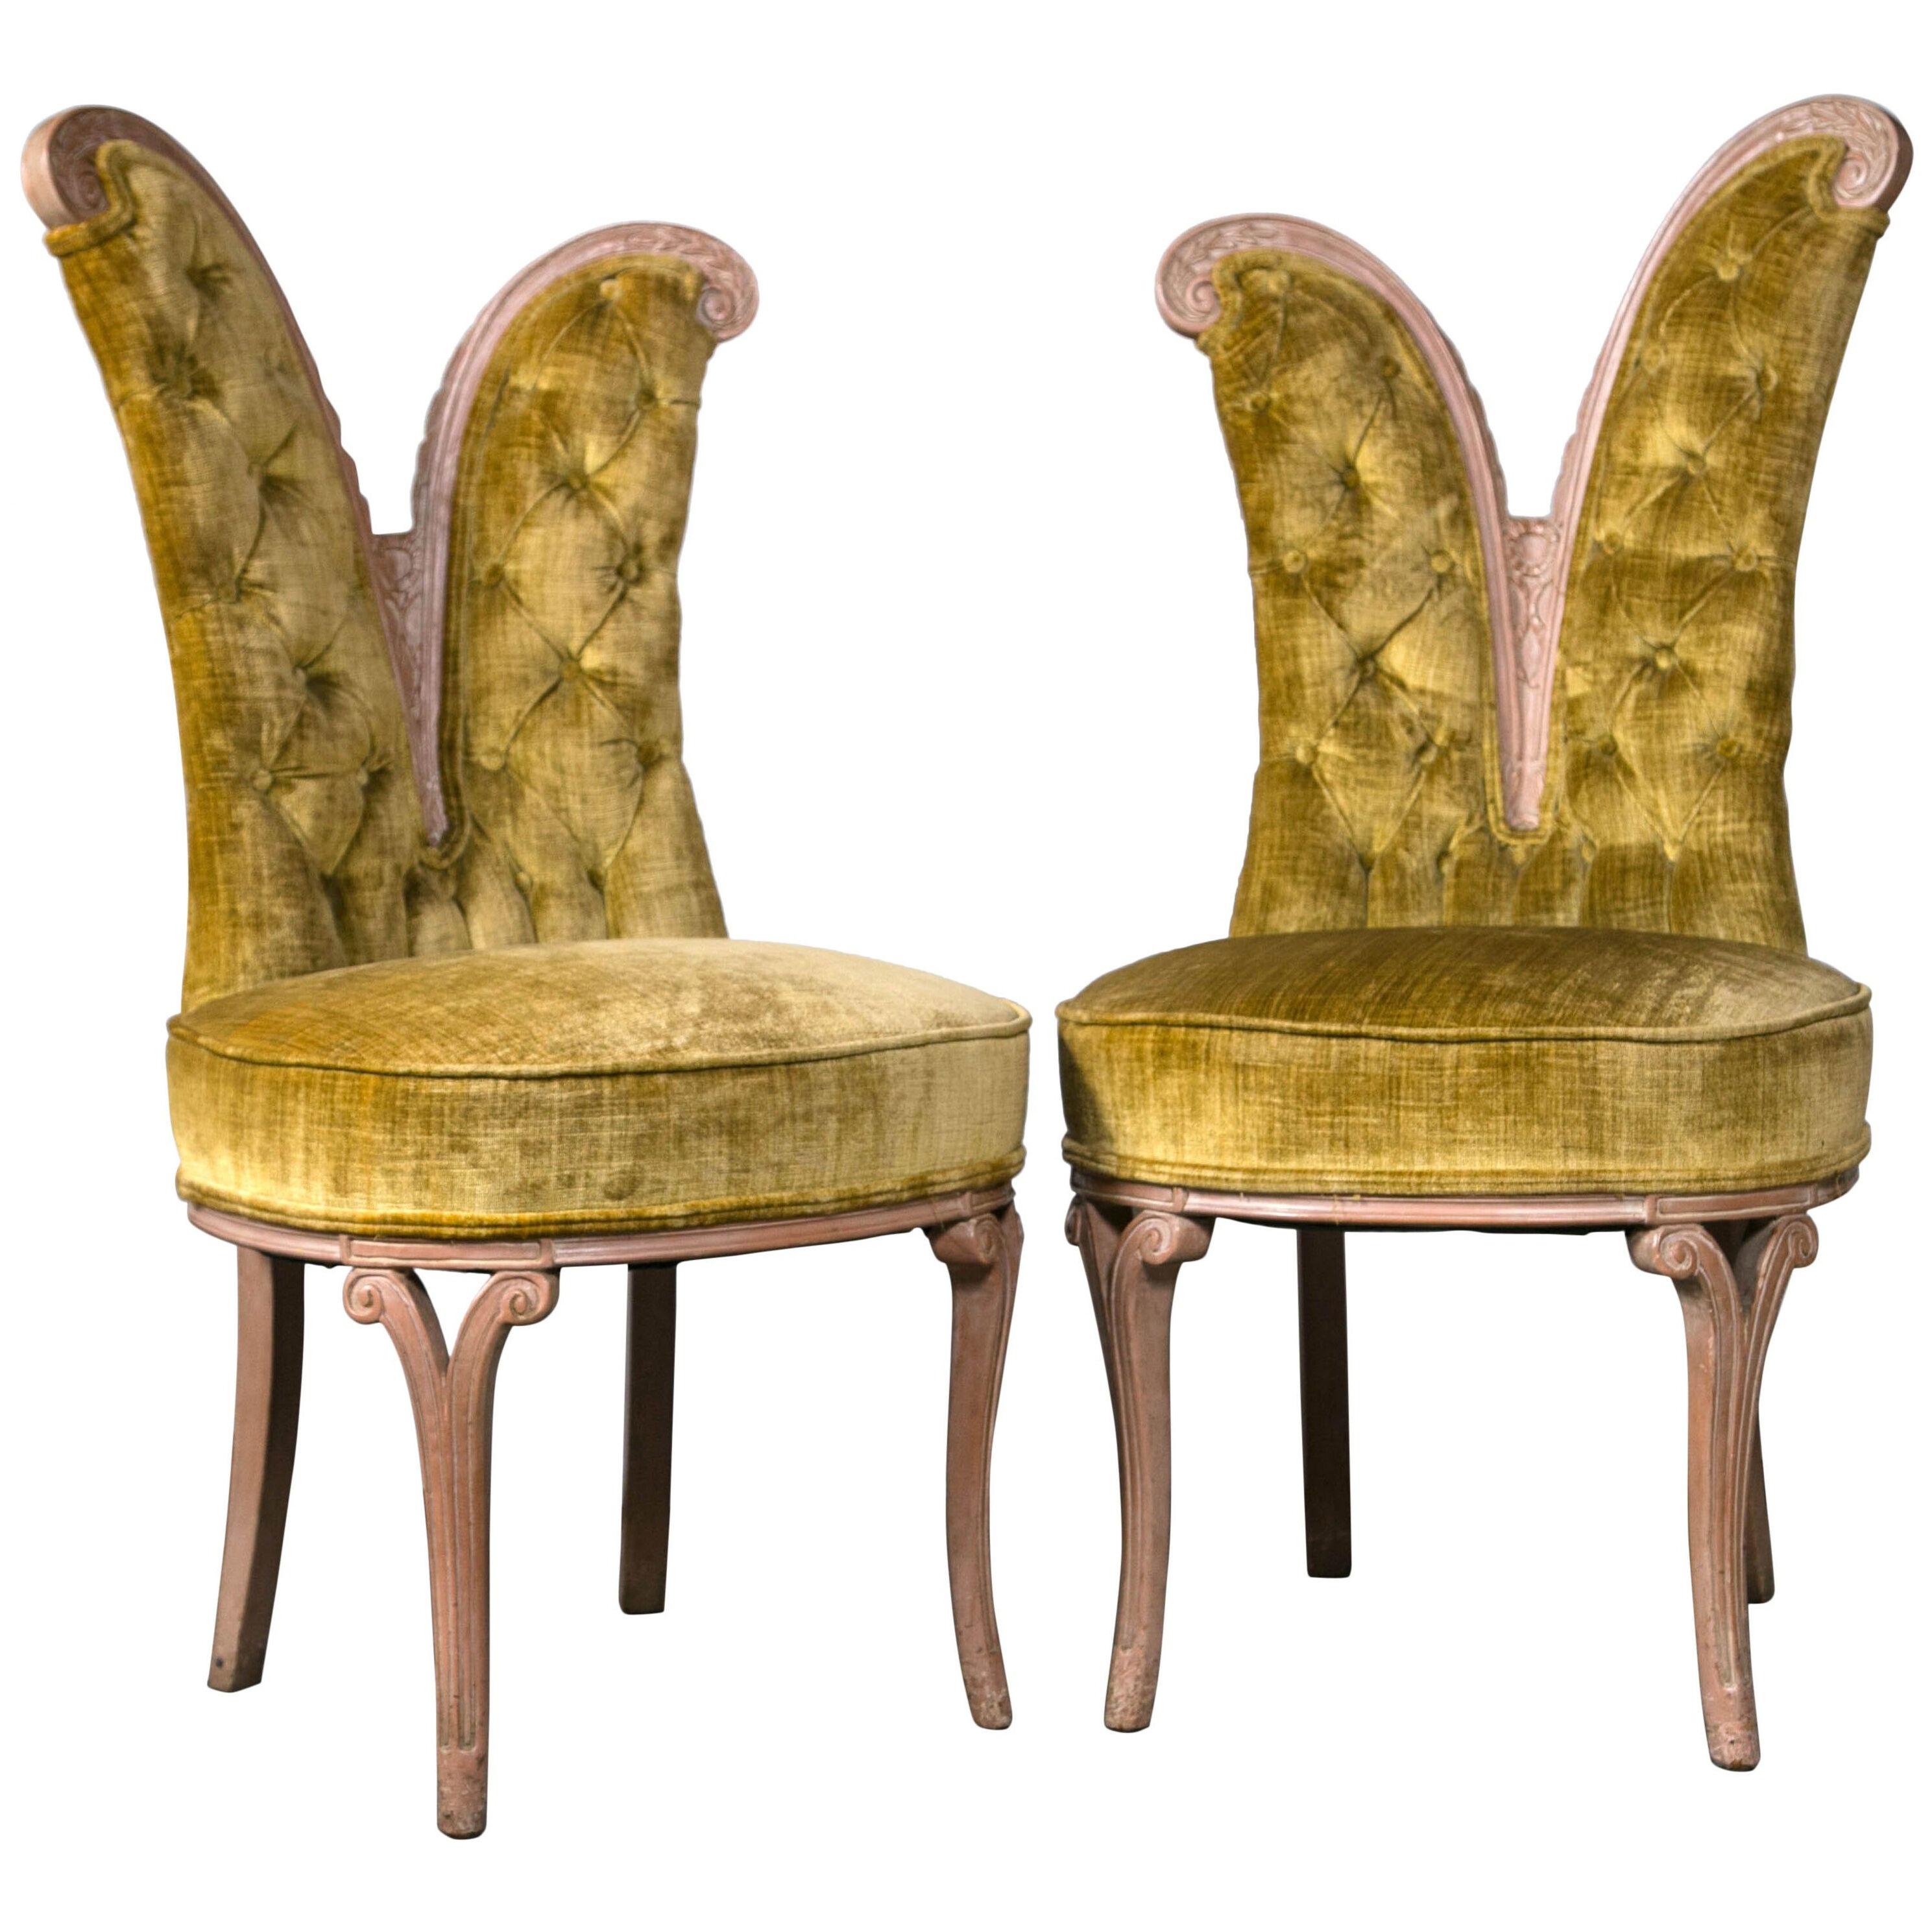 Pair of Art Deco Style Feather Decorated Side Chairs Tufted Back Curved Details